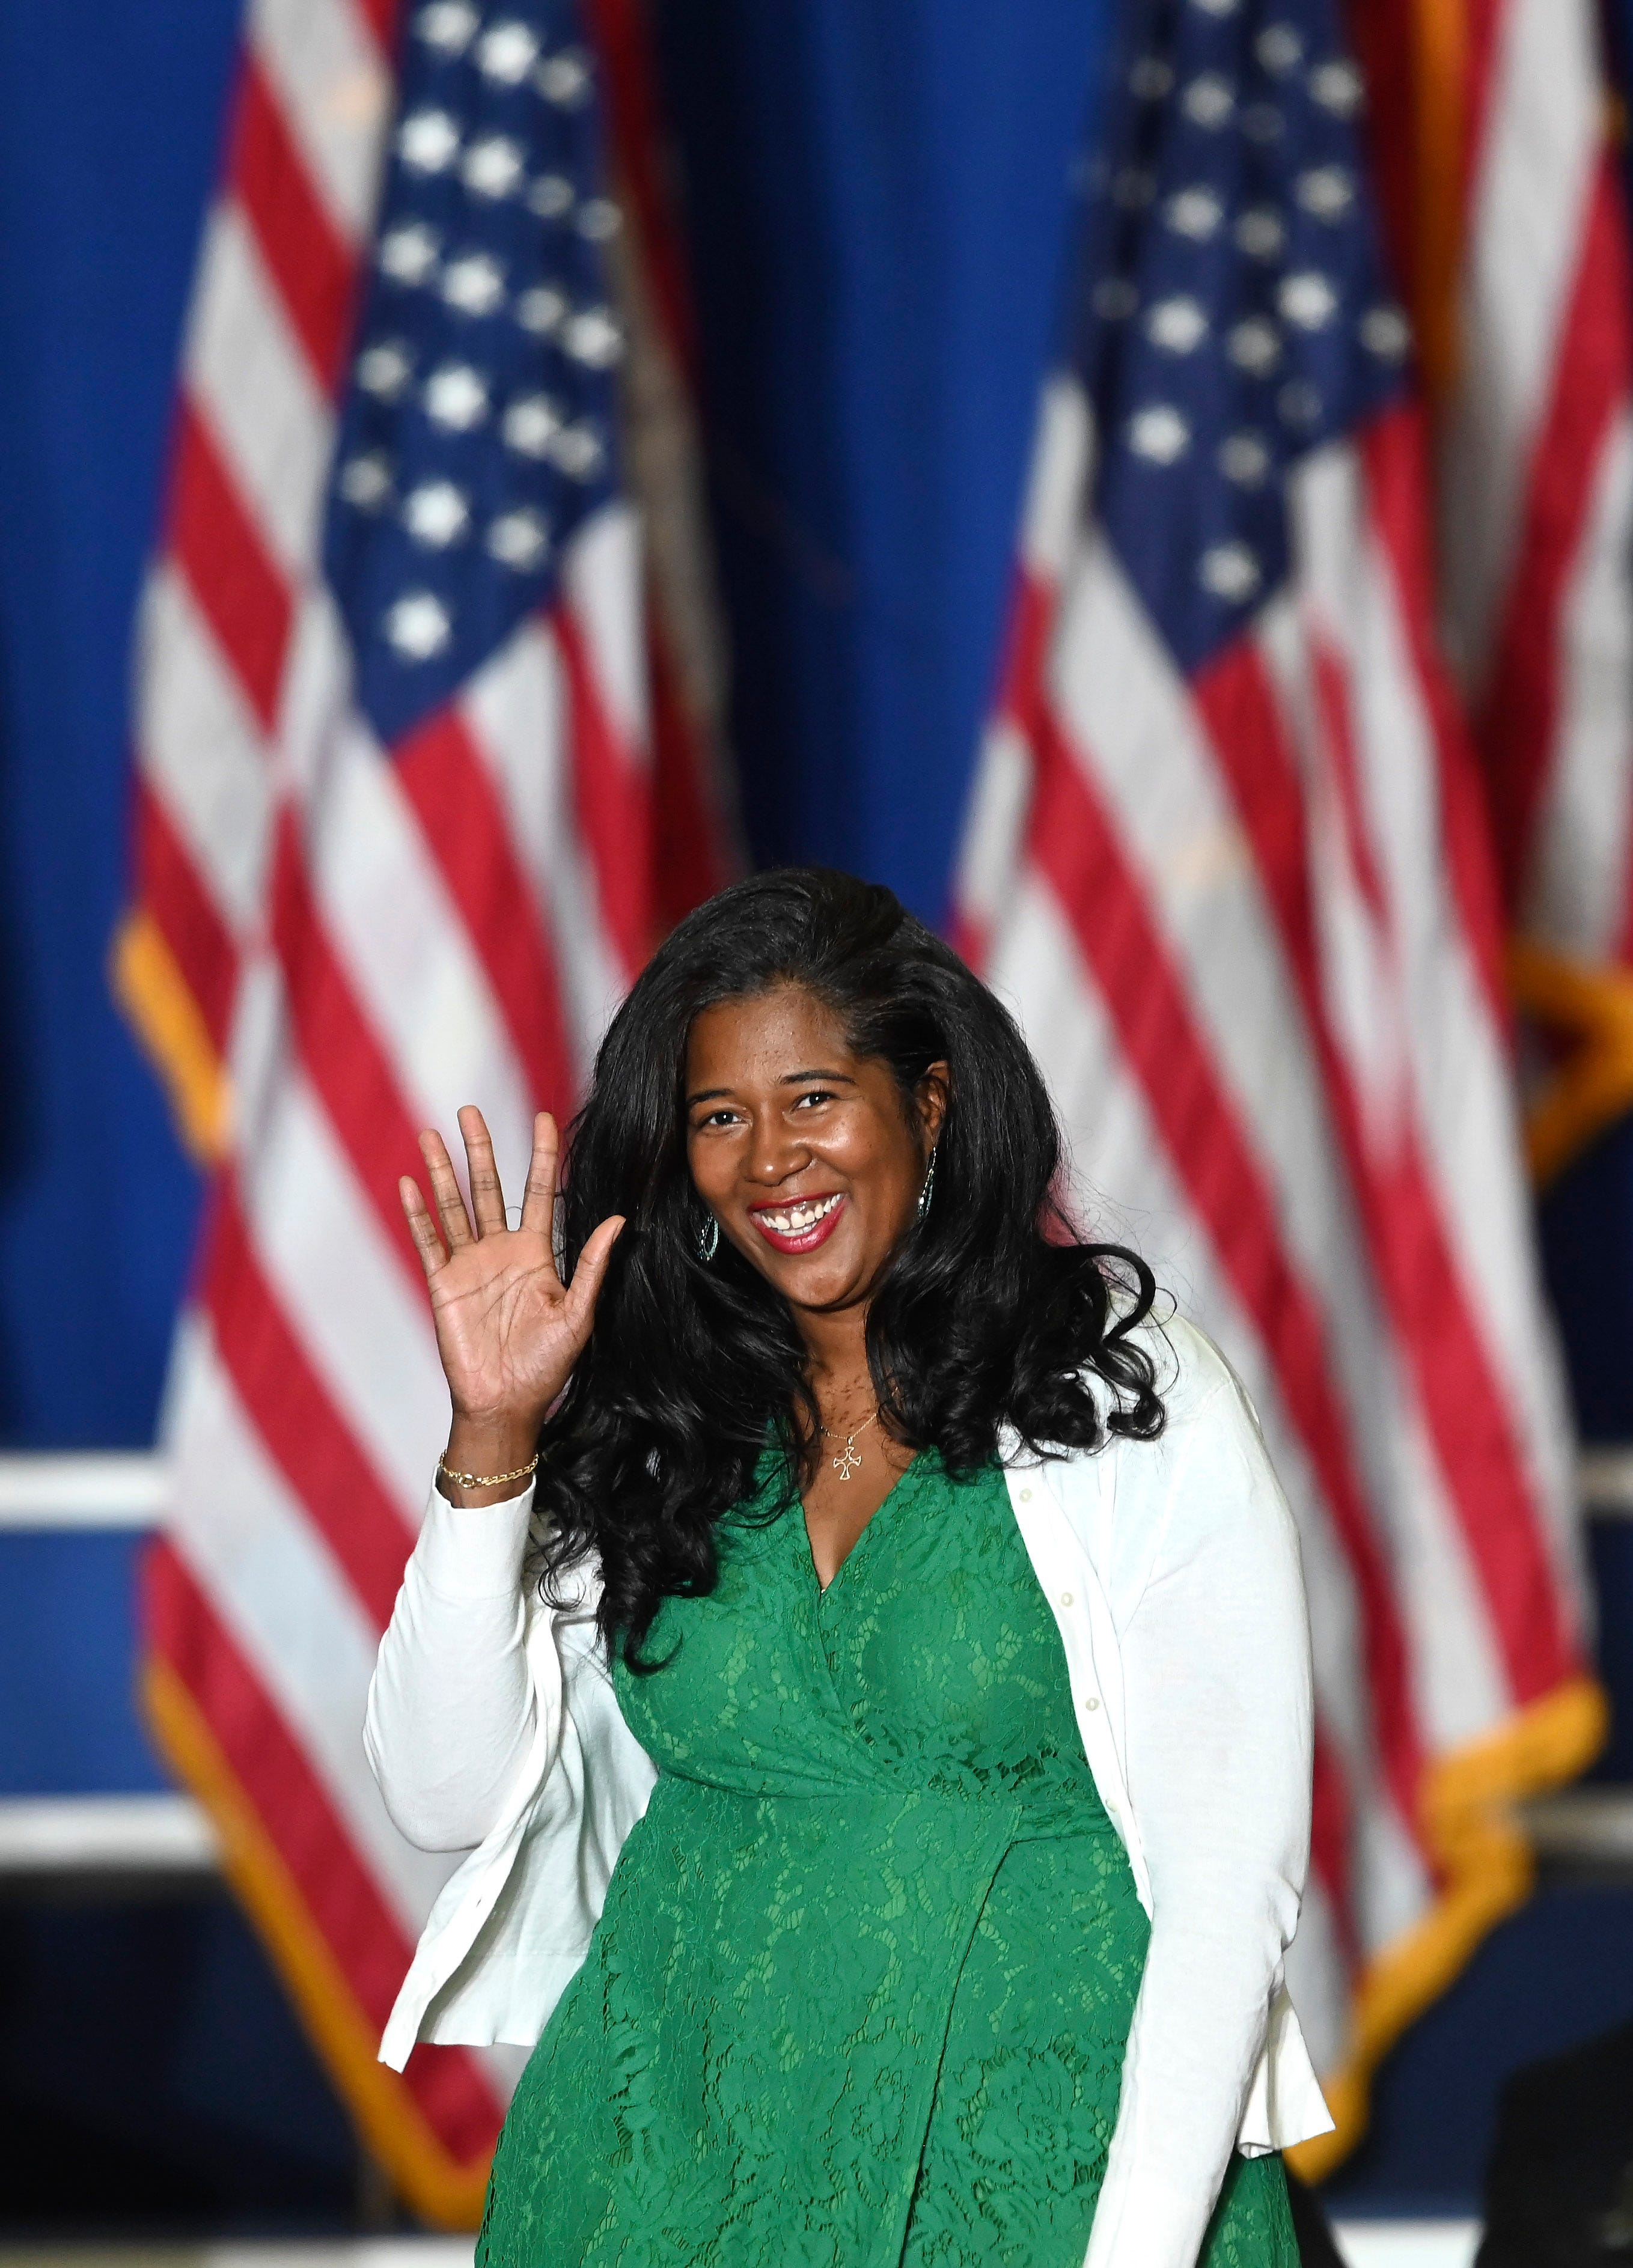 MI Secretary of State Republican candidate Kristina Karamo waves to the crowd on her way to the podium, at a Donald Trump rally at the Macomb Community College Sports & Expo Center in Warren, Saturday, October 1, 2022.